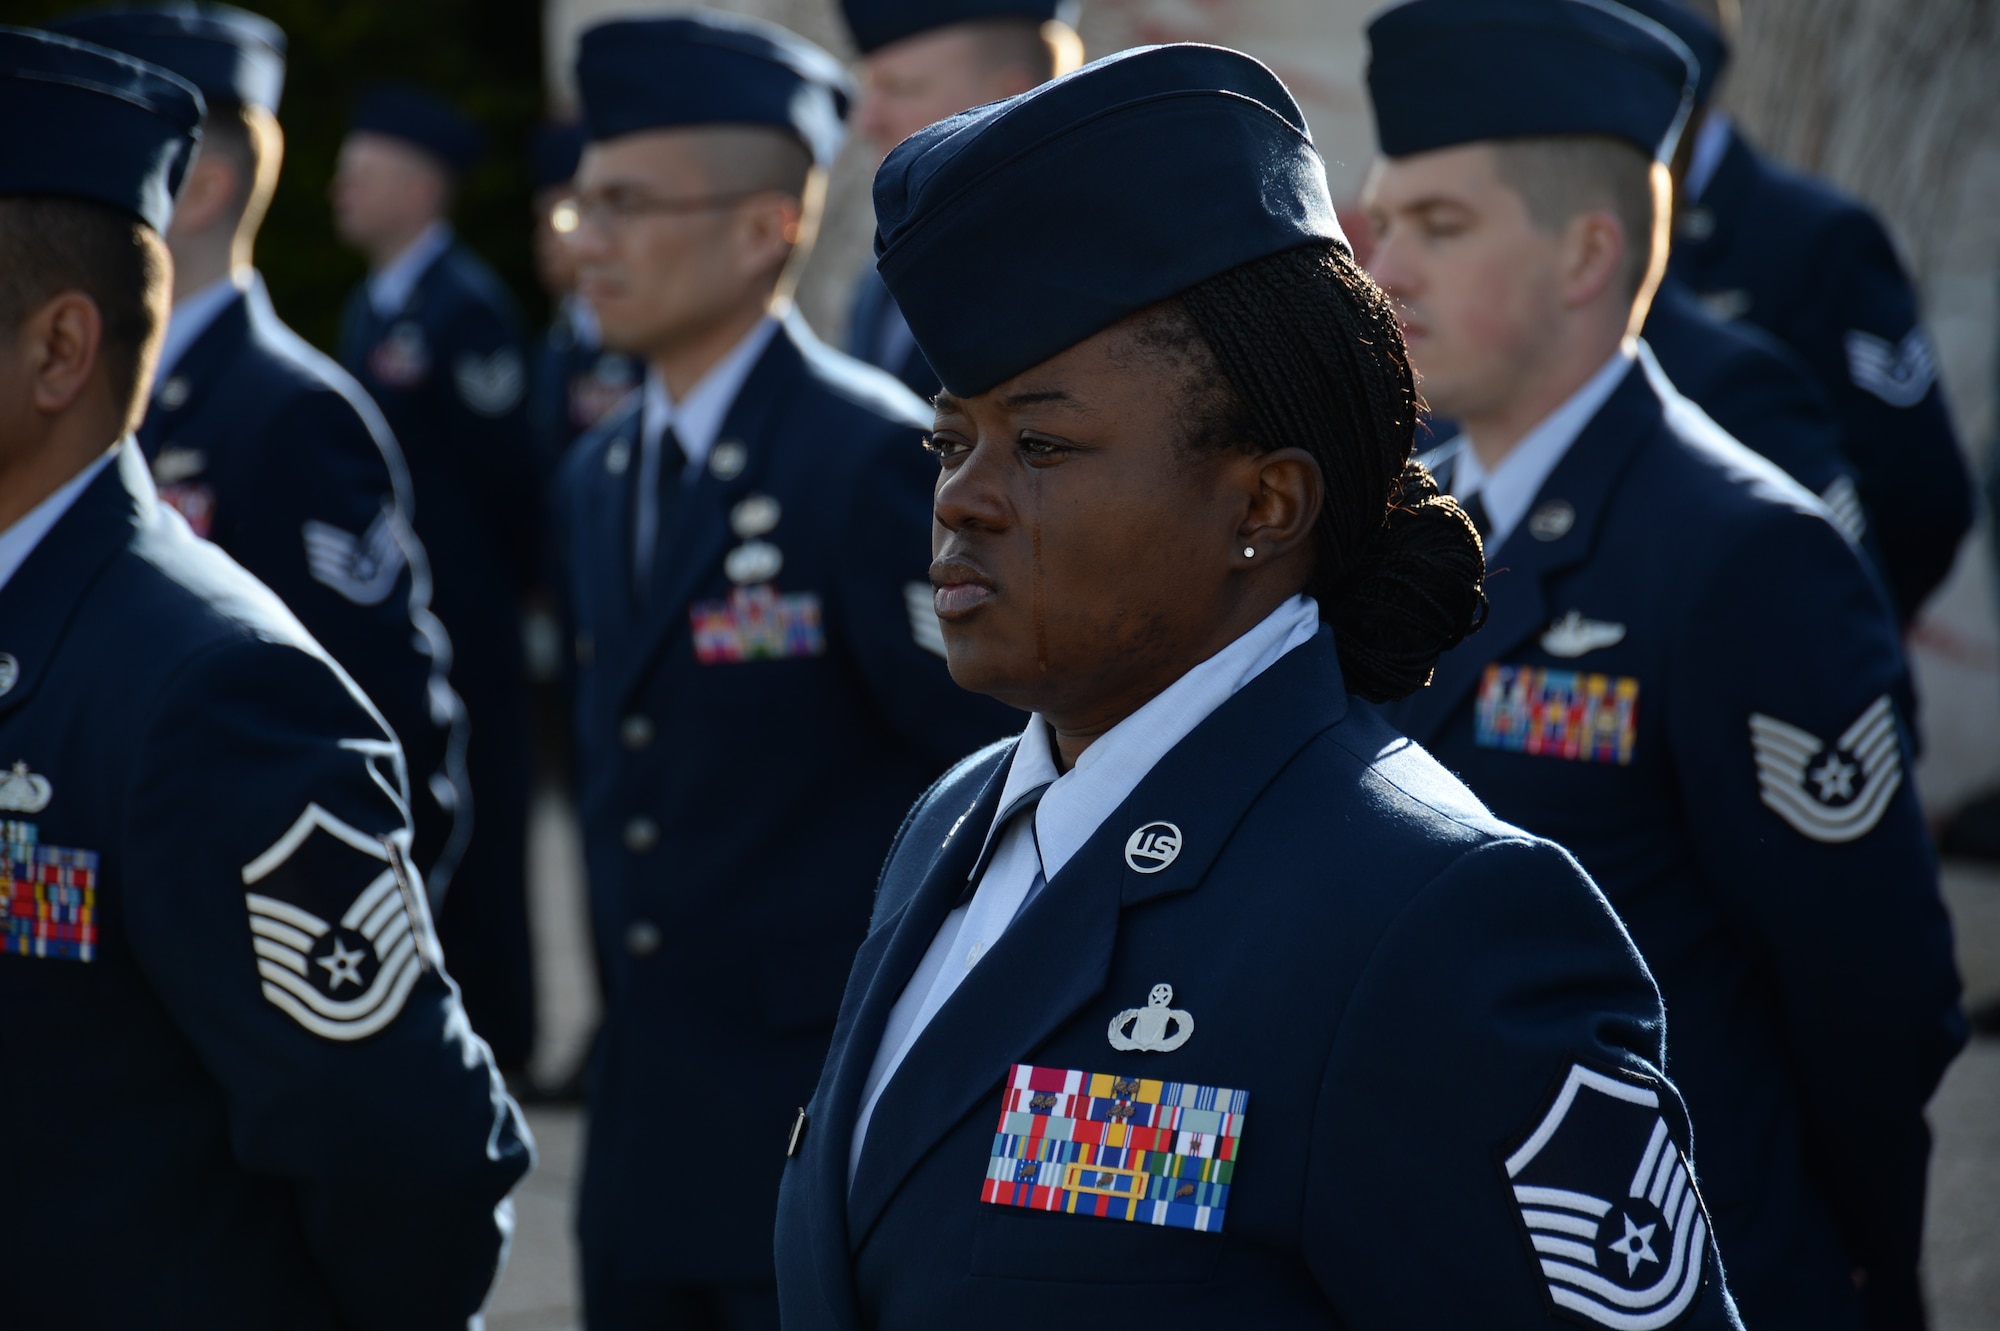 HOMBOURG, Belgium --- U.S. Air Force Master Sgt. Shaneeka Jones, superintendent of flight records from the 470th Air Base Squadron at NATO Air Base Geilenkirchen, Germany, stands at parade rest during a Veterans Day memorial ceremony at the Henri-Chapelle American Cemetery Nov. 11, 2013. More than 40 American service members participated in the ceremony before nearly 100 attendees to honor the service and sacrifice of American veterans. (U.S. Air Force photo by Staff Sgt. Joe W. McFadden/Released)